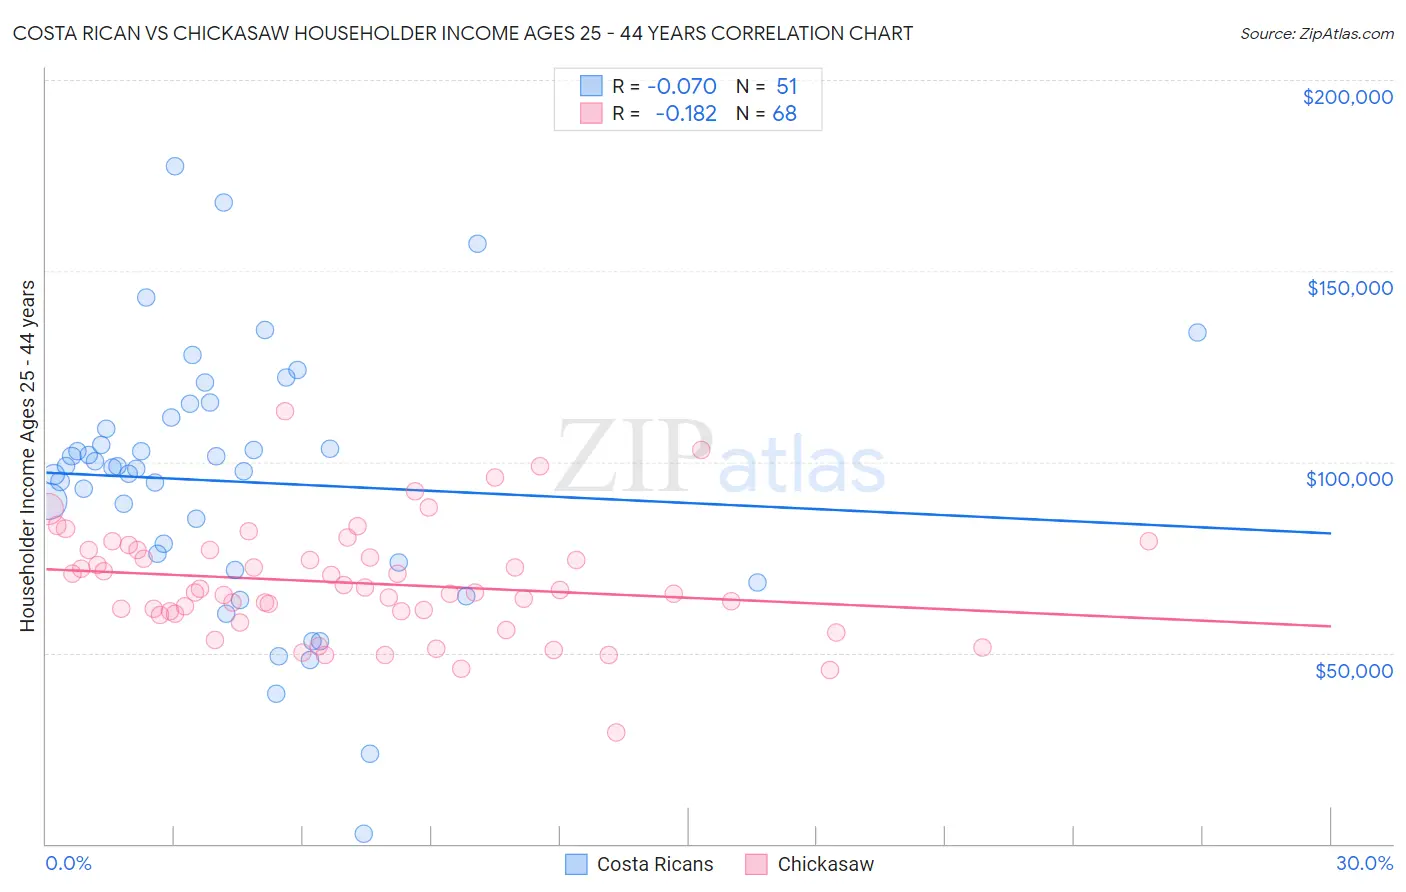 Costa Rican vs Chickasaw Householder Income Ages 25 - 44 years